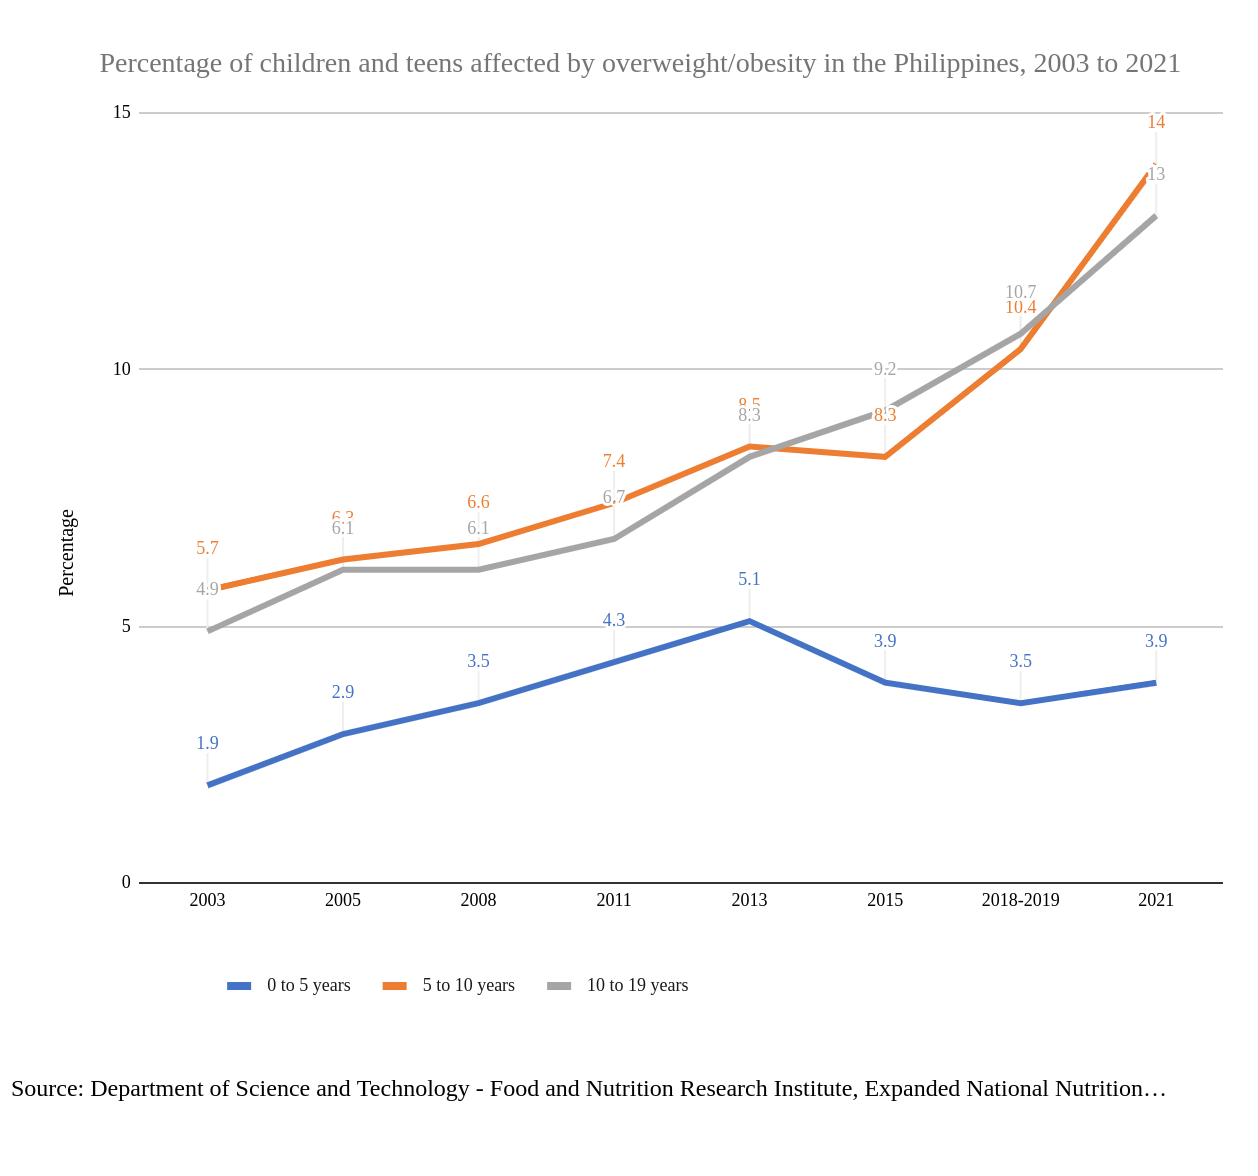 Percentage of children and teens affected by overweight/obesity in the Philippines, 2003 to 2021. Source: Department of Science and Technology - Food and Nutrition Research Institute, Expanded National Nutrition Survey Overview and Methodology